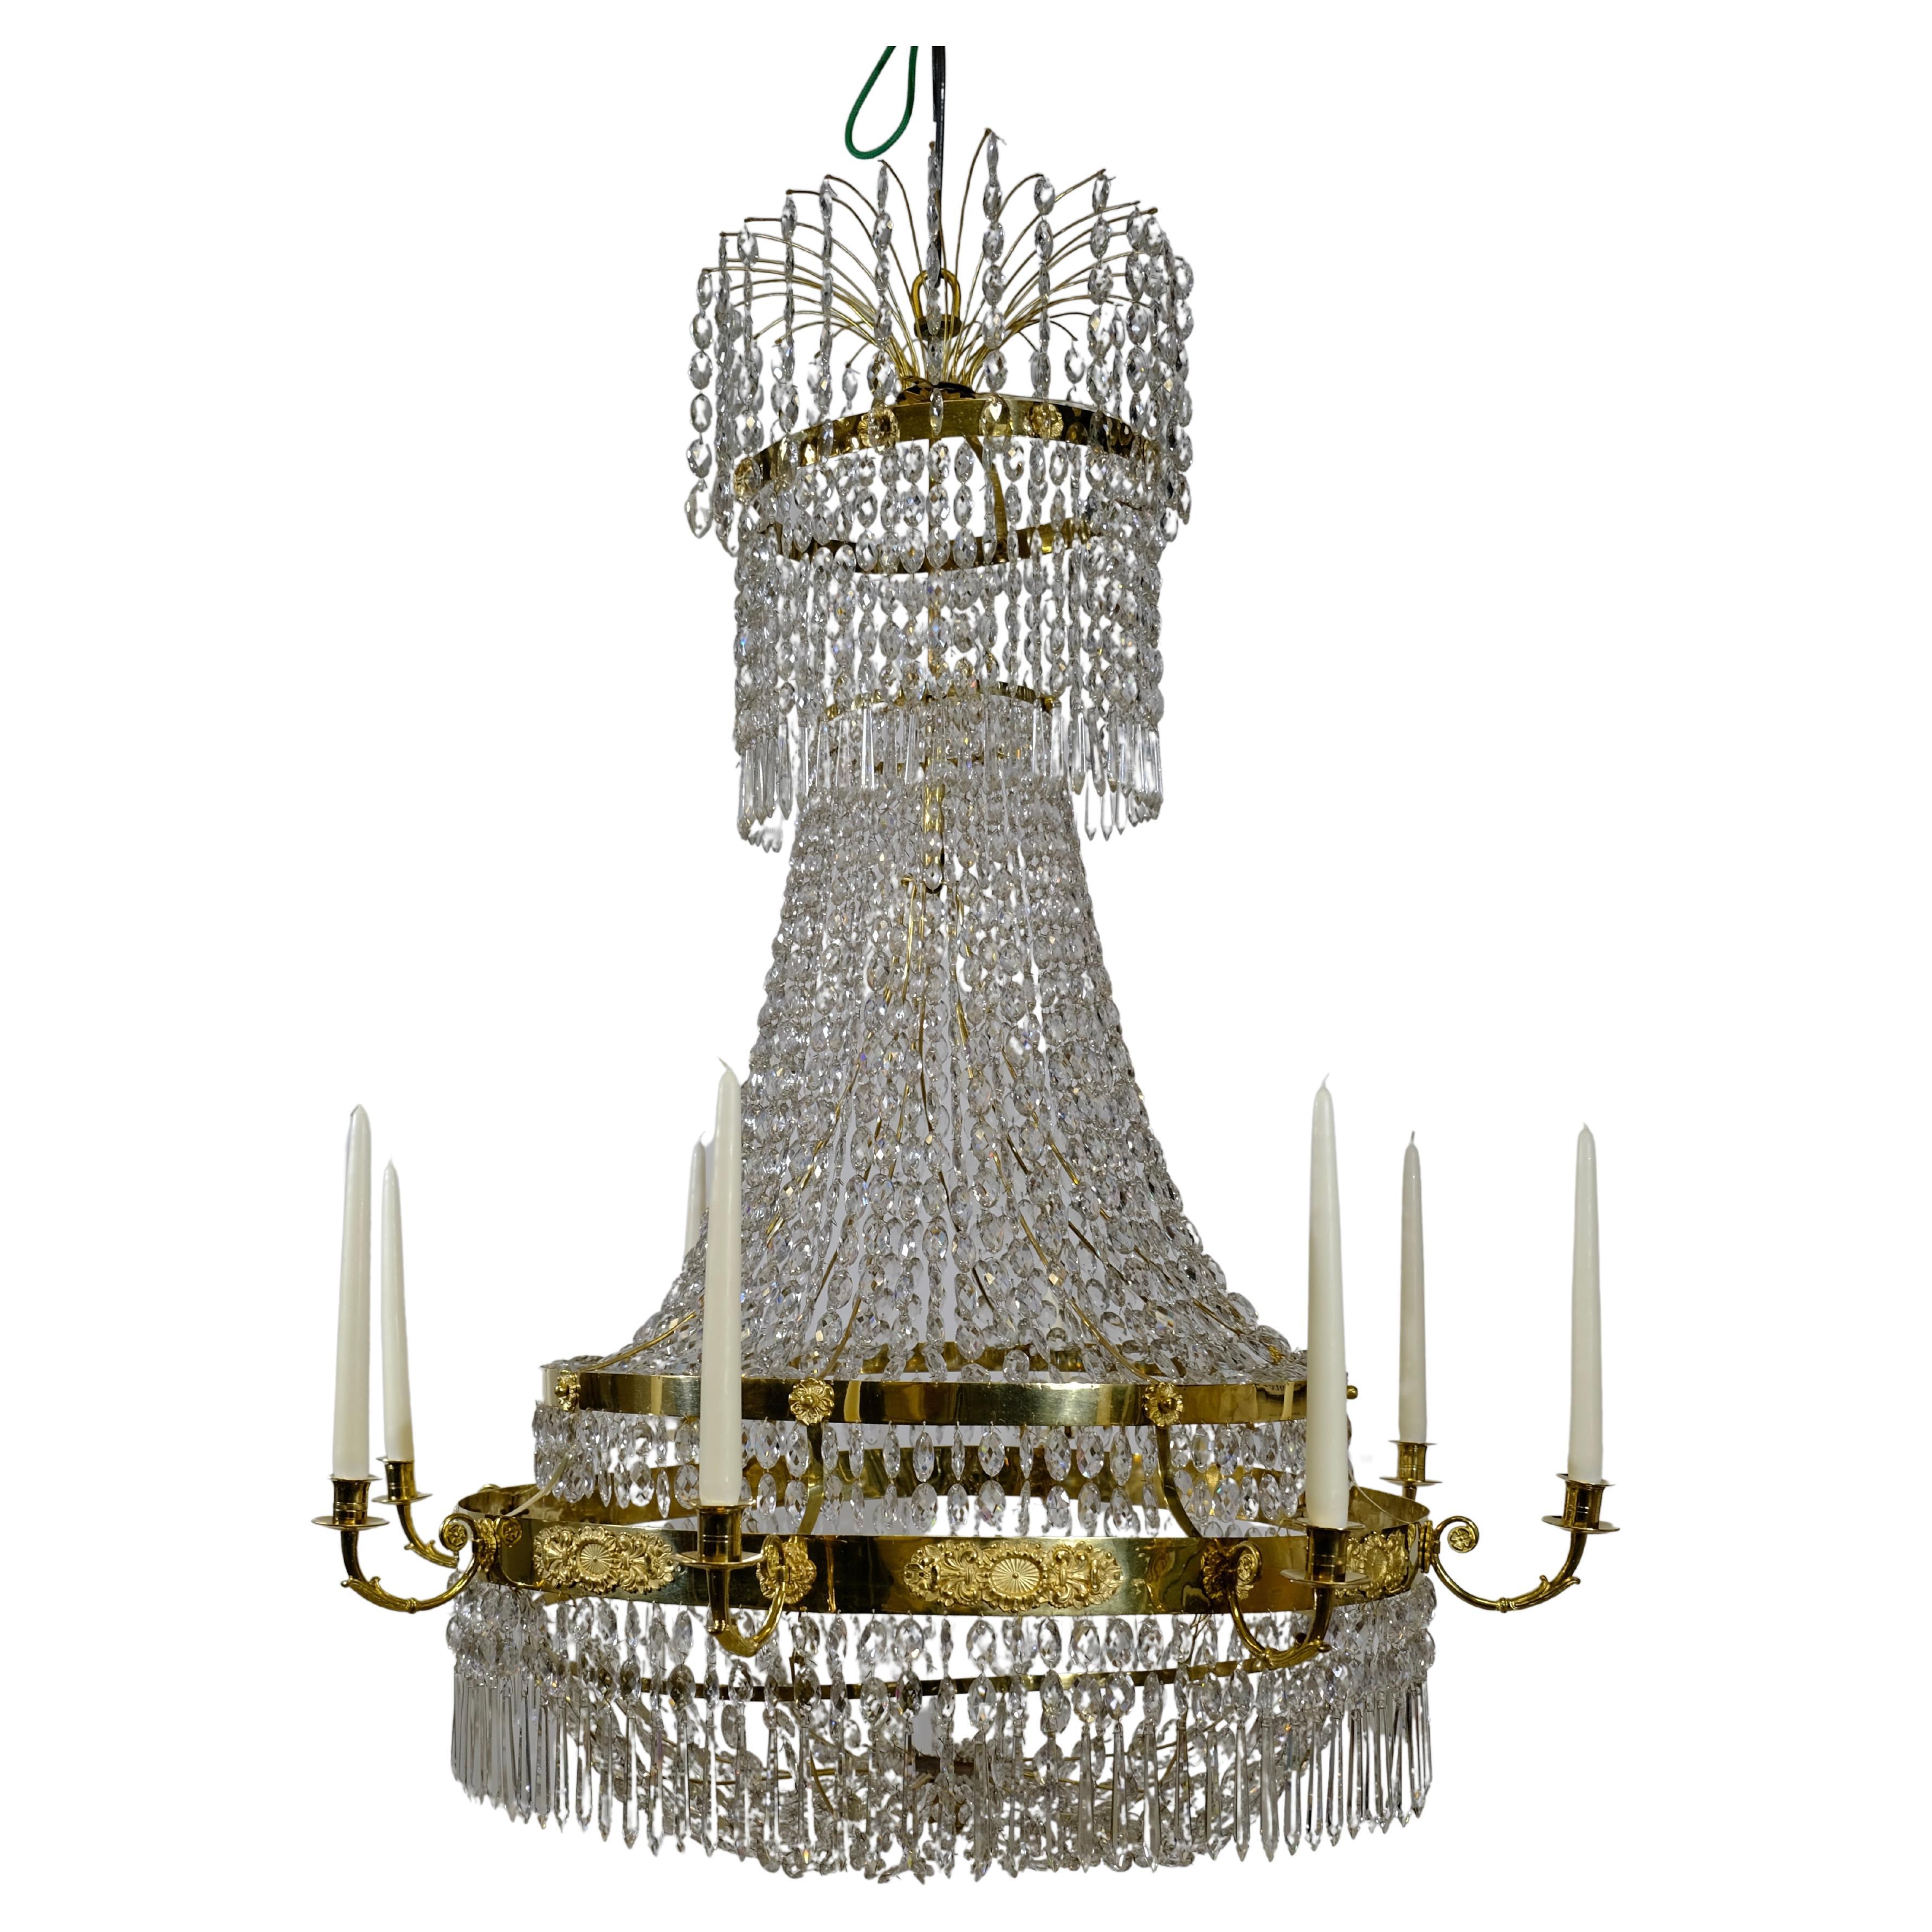 A large and very fine Swedish Empire gilt-brass and cut-glass chandelier from the early 19th century. The corona hung with chains of drops and overall hung with beaded chains, the central tier issuing twelve scrolled candle arms above scroll